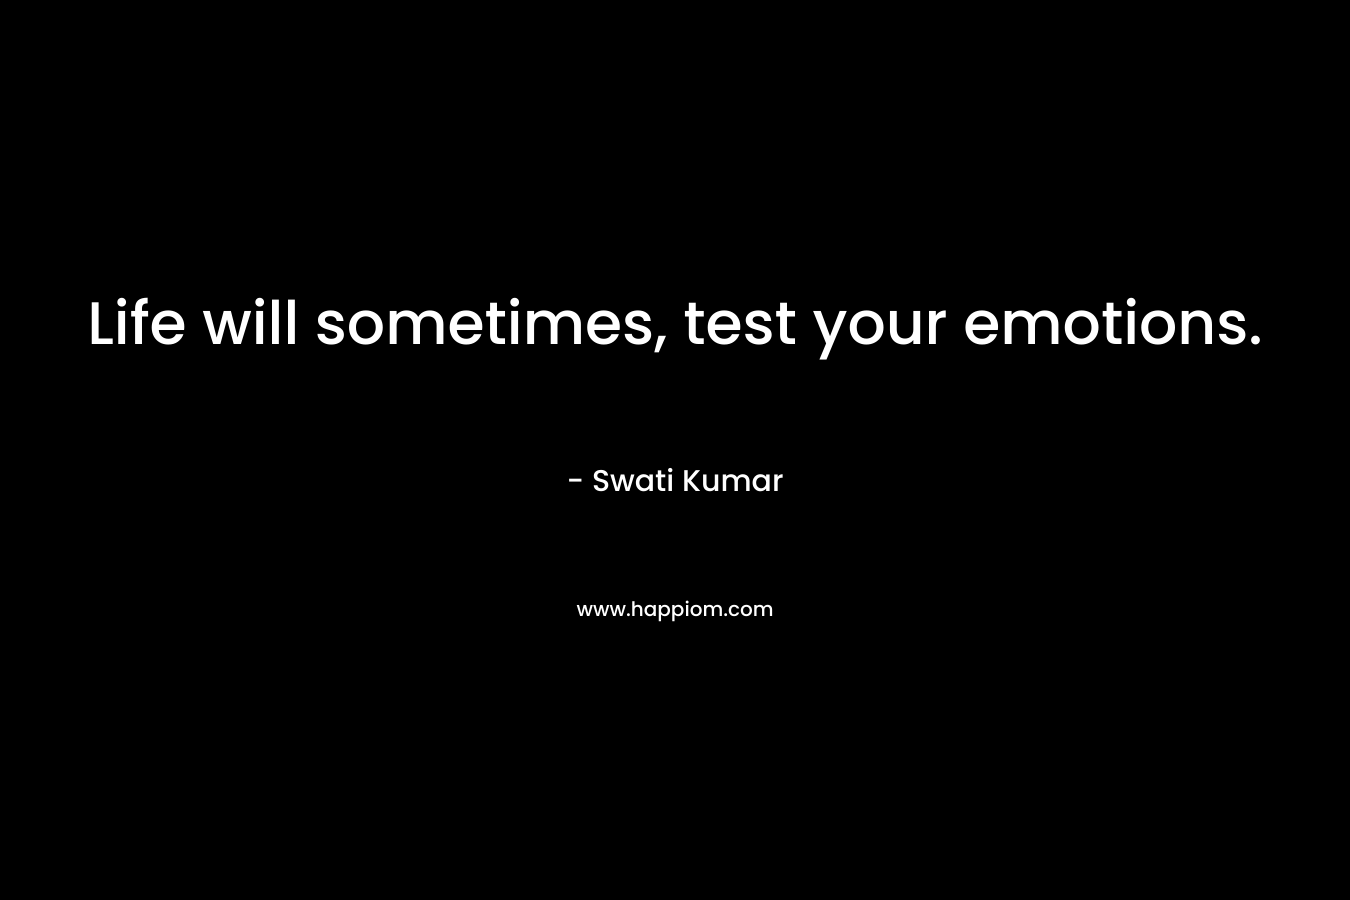 Life will sometimes, test your emotions.